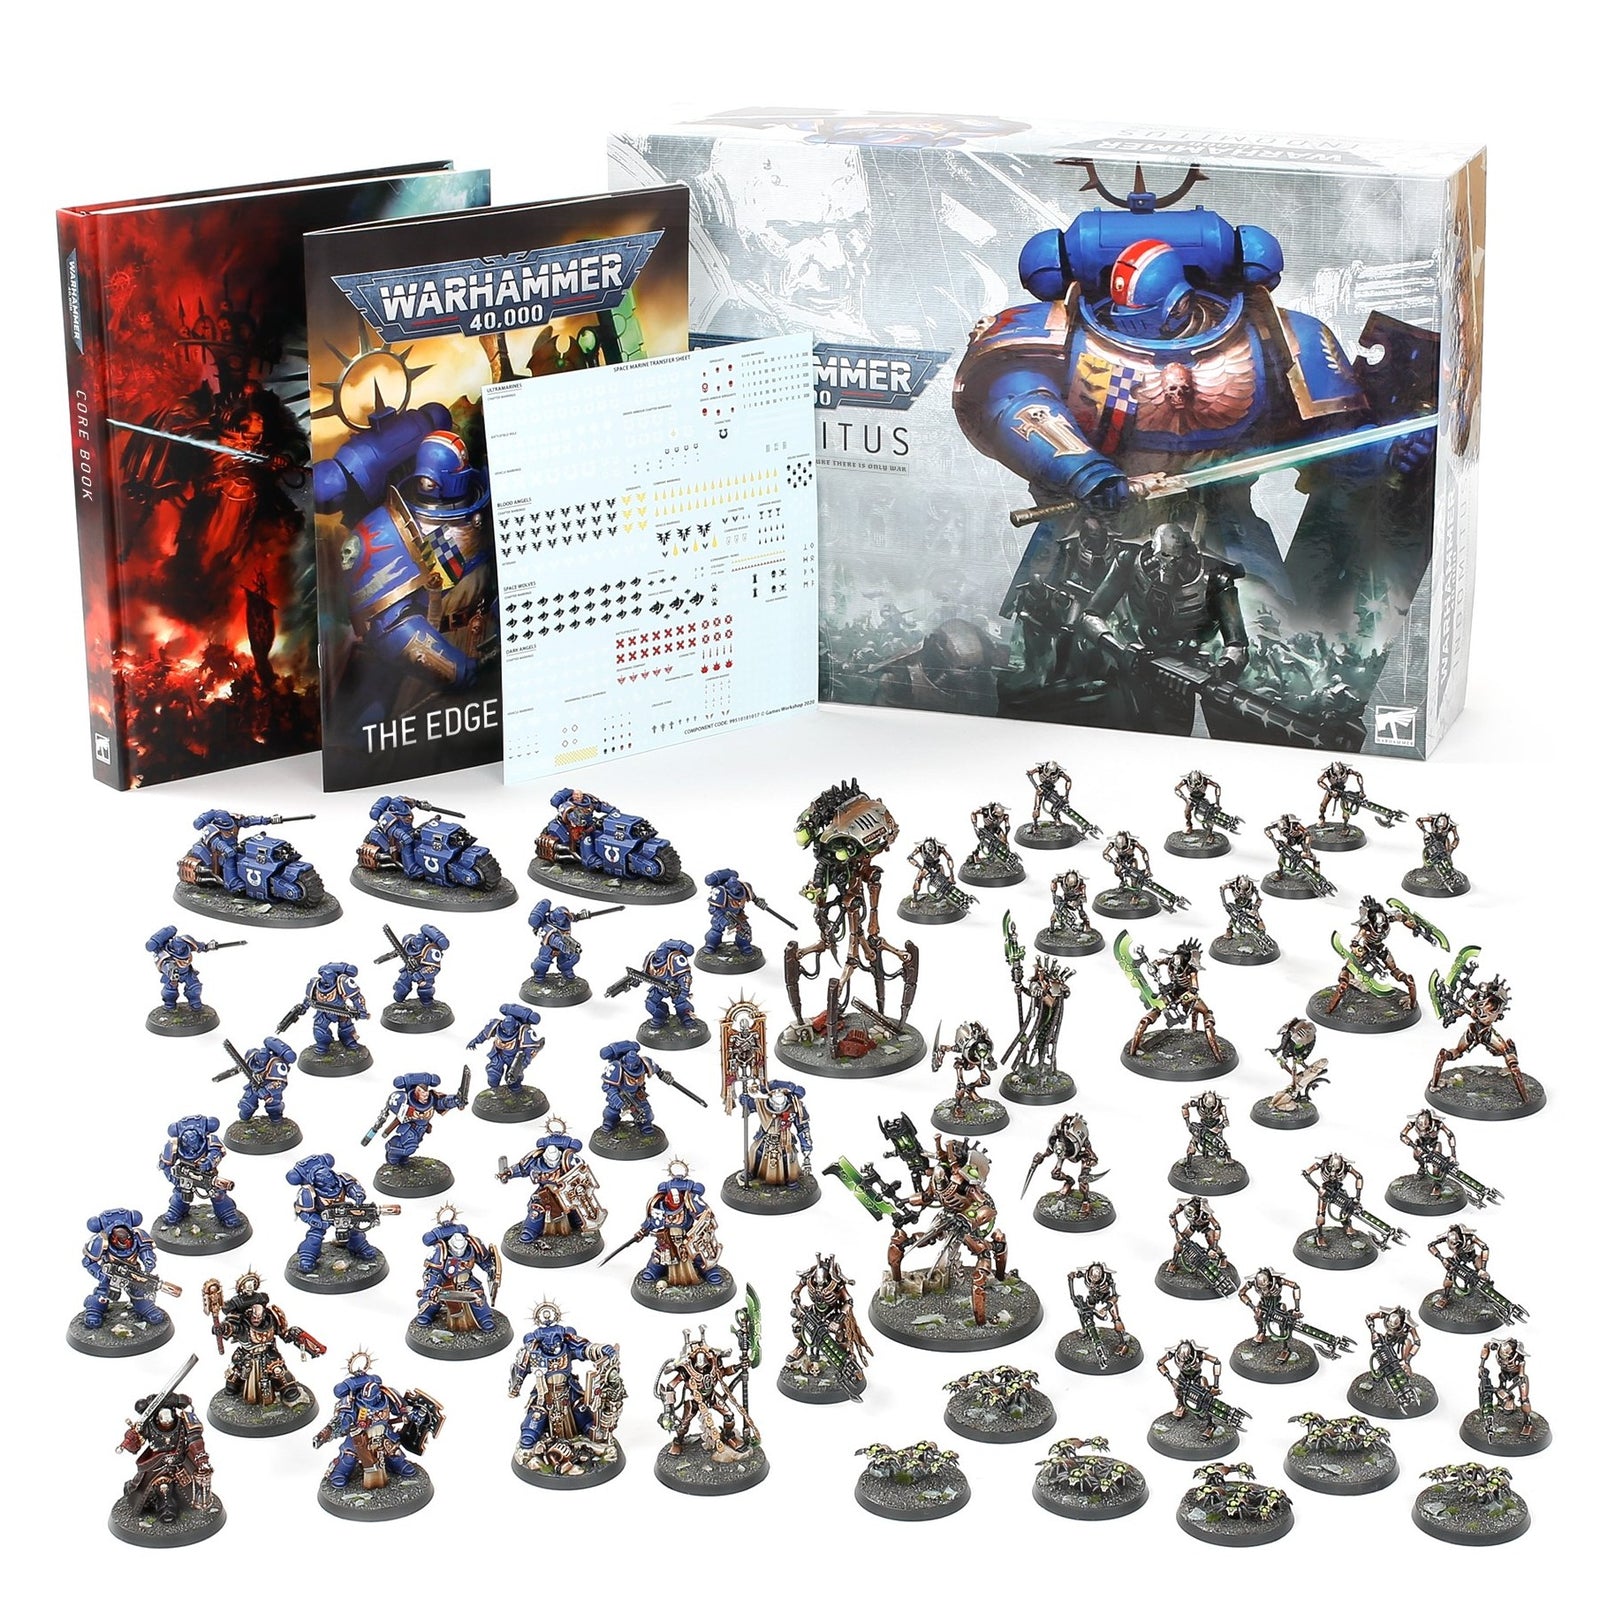 Group view of Warhammer 40,000 Indomitus Box and Contents